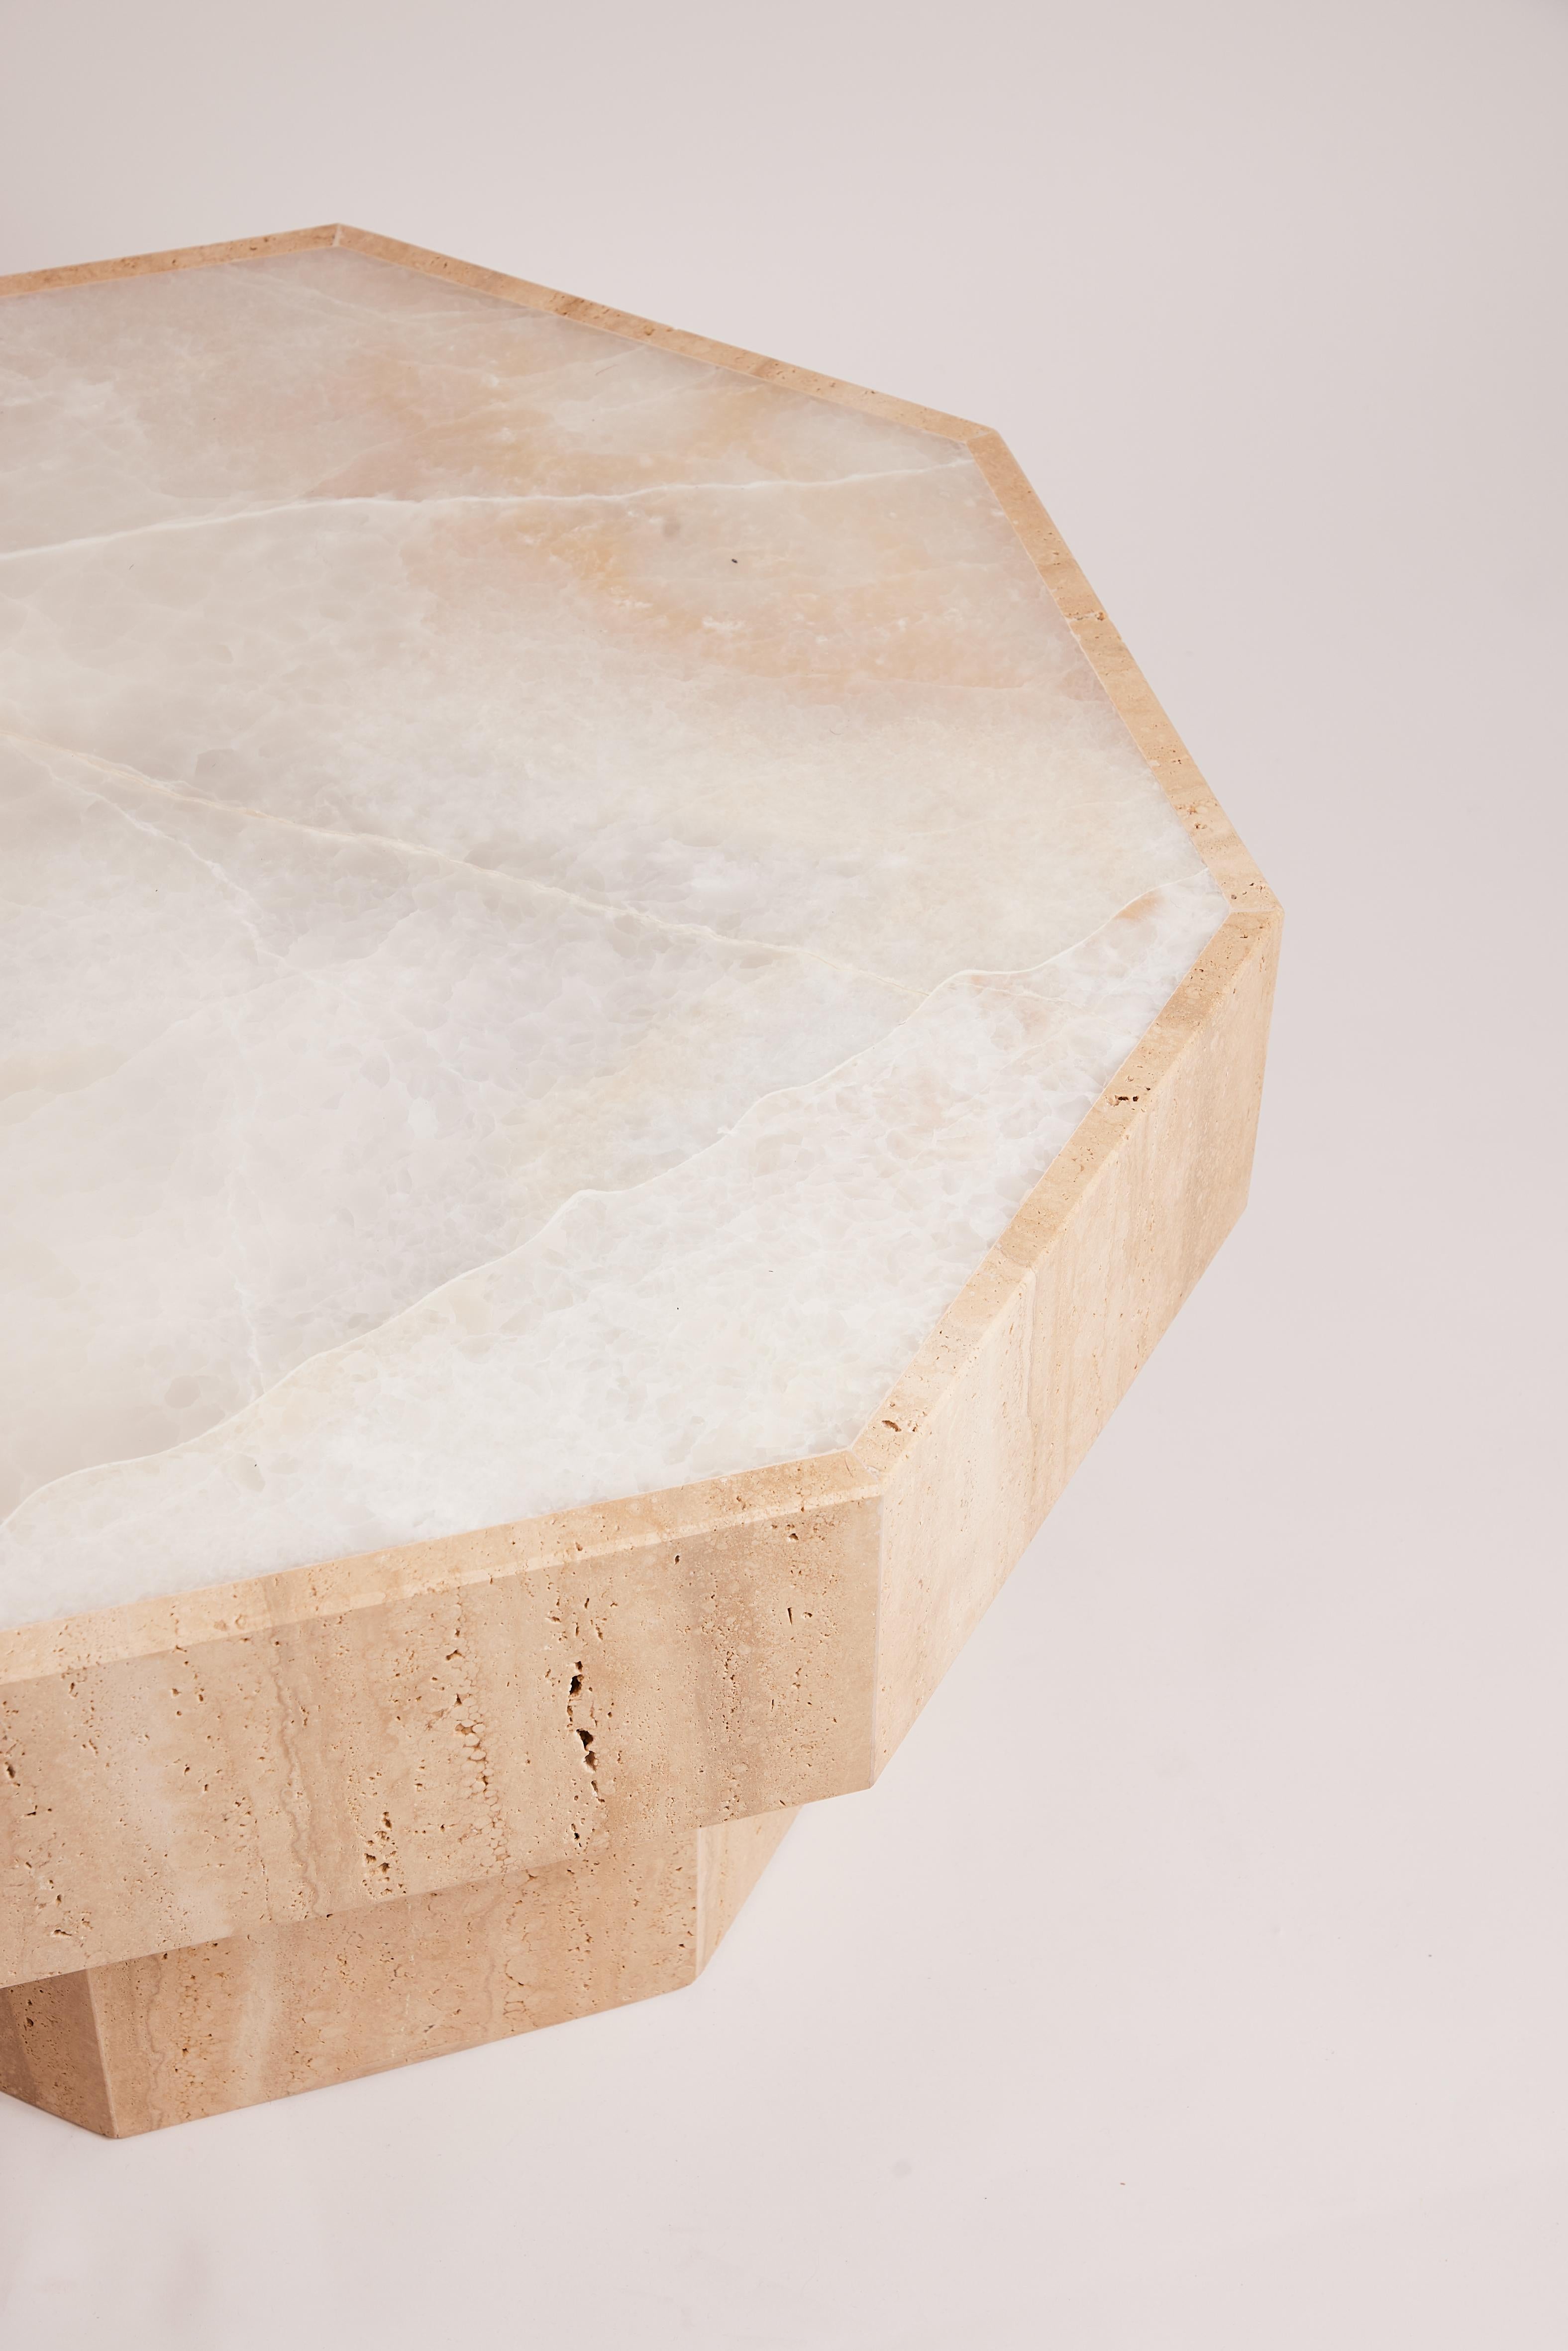 The Simone coffee table, in onyx and travertine, features two types of natural stones known for their unique beauty and durable properties. Onyx gives the table subtly translucent veins in hues from creamy white to golden honey, while travertine